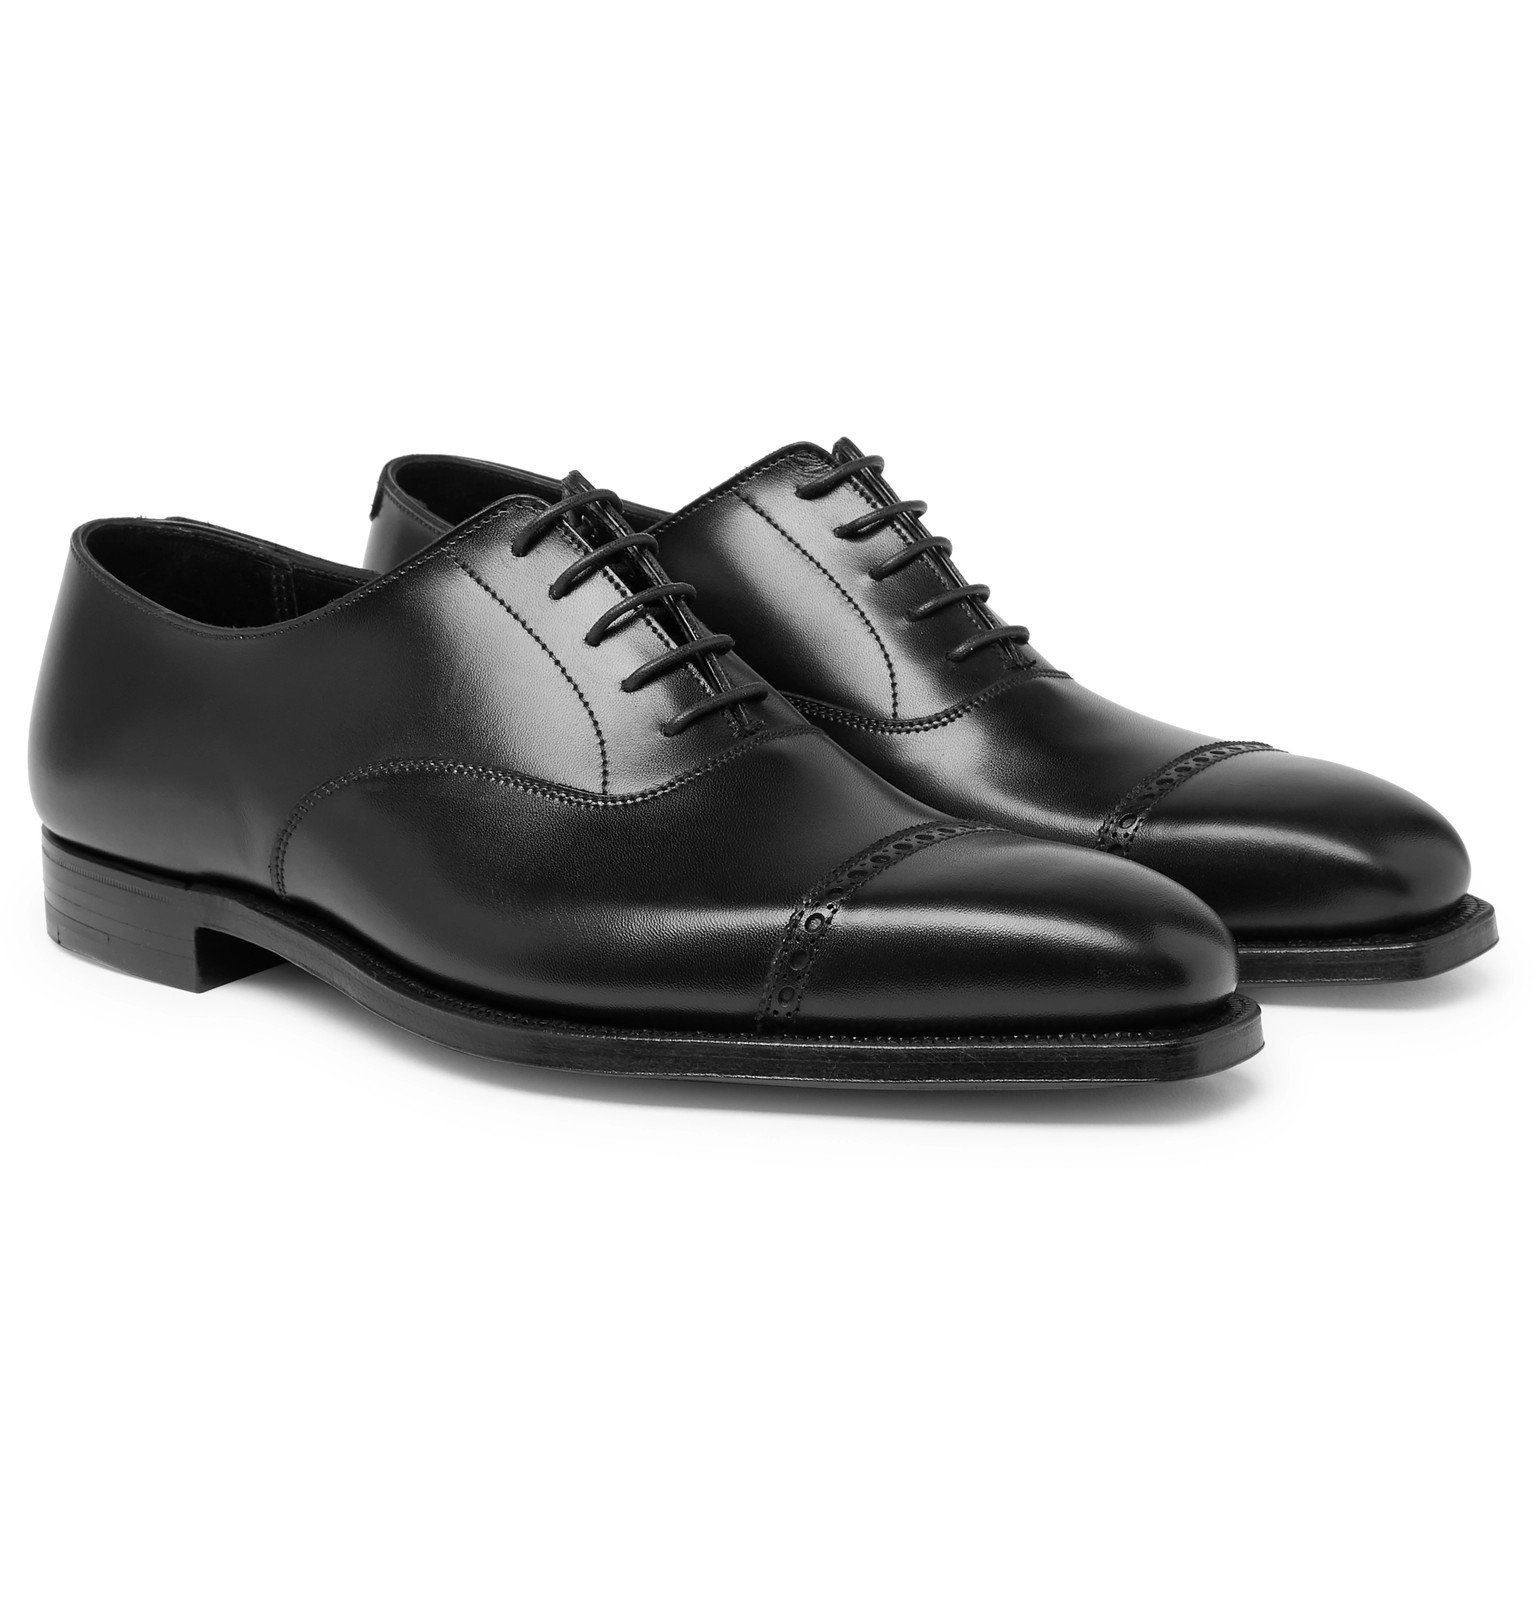 George Cleverley - Charles Cap-Toe Full-Grain Leather Oxford Shoes ...